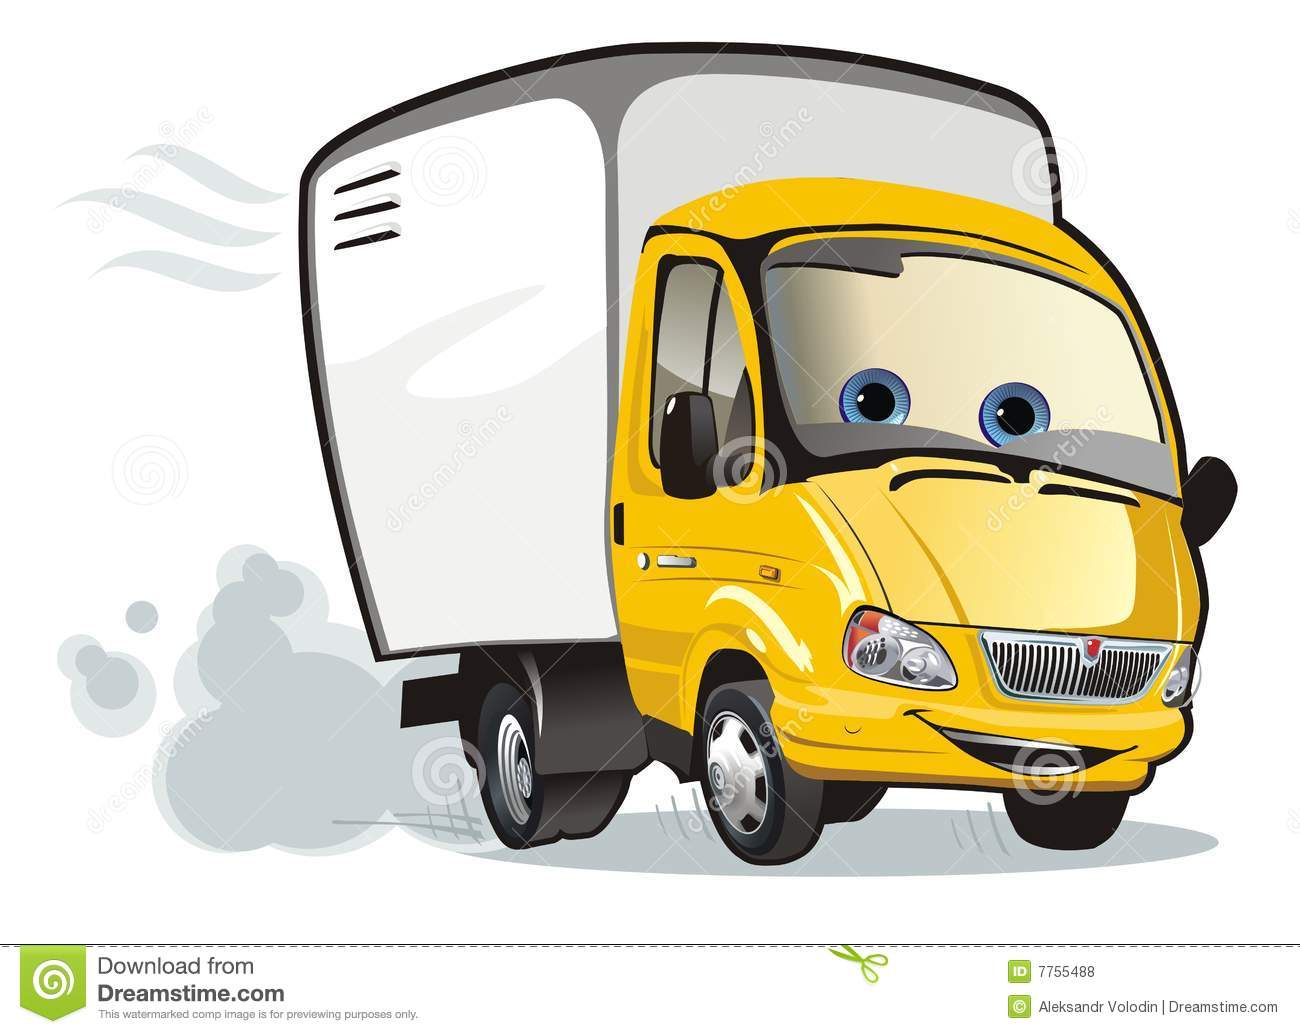 Cartoon Delivery   Cargo Truck Royalty Free Stock Photos   Image    